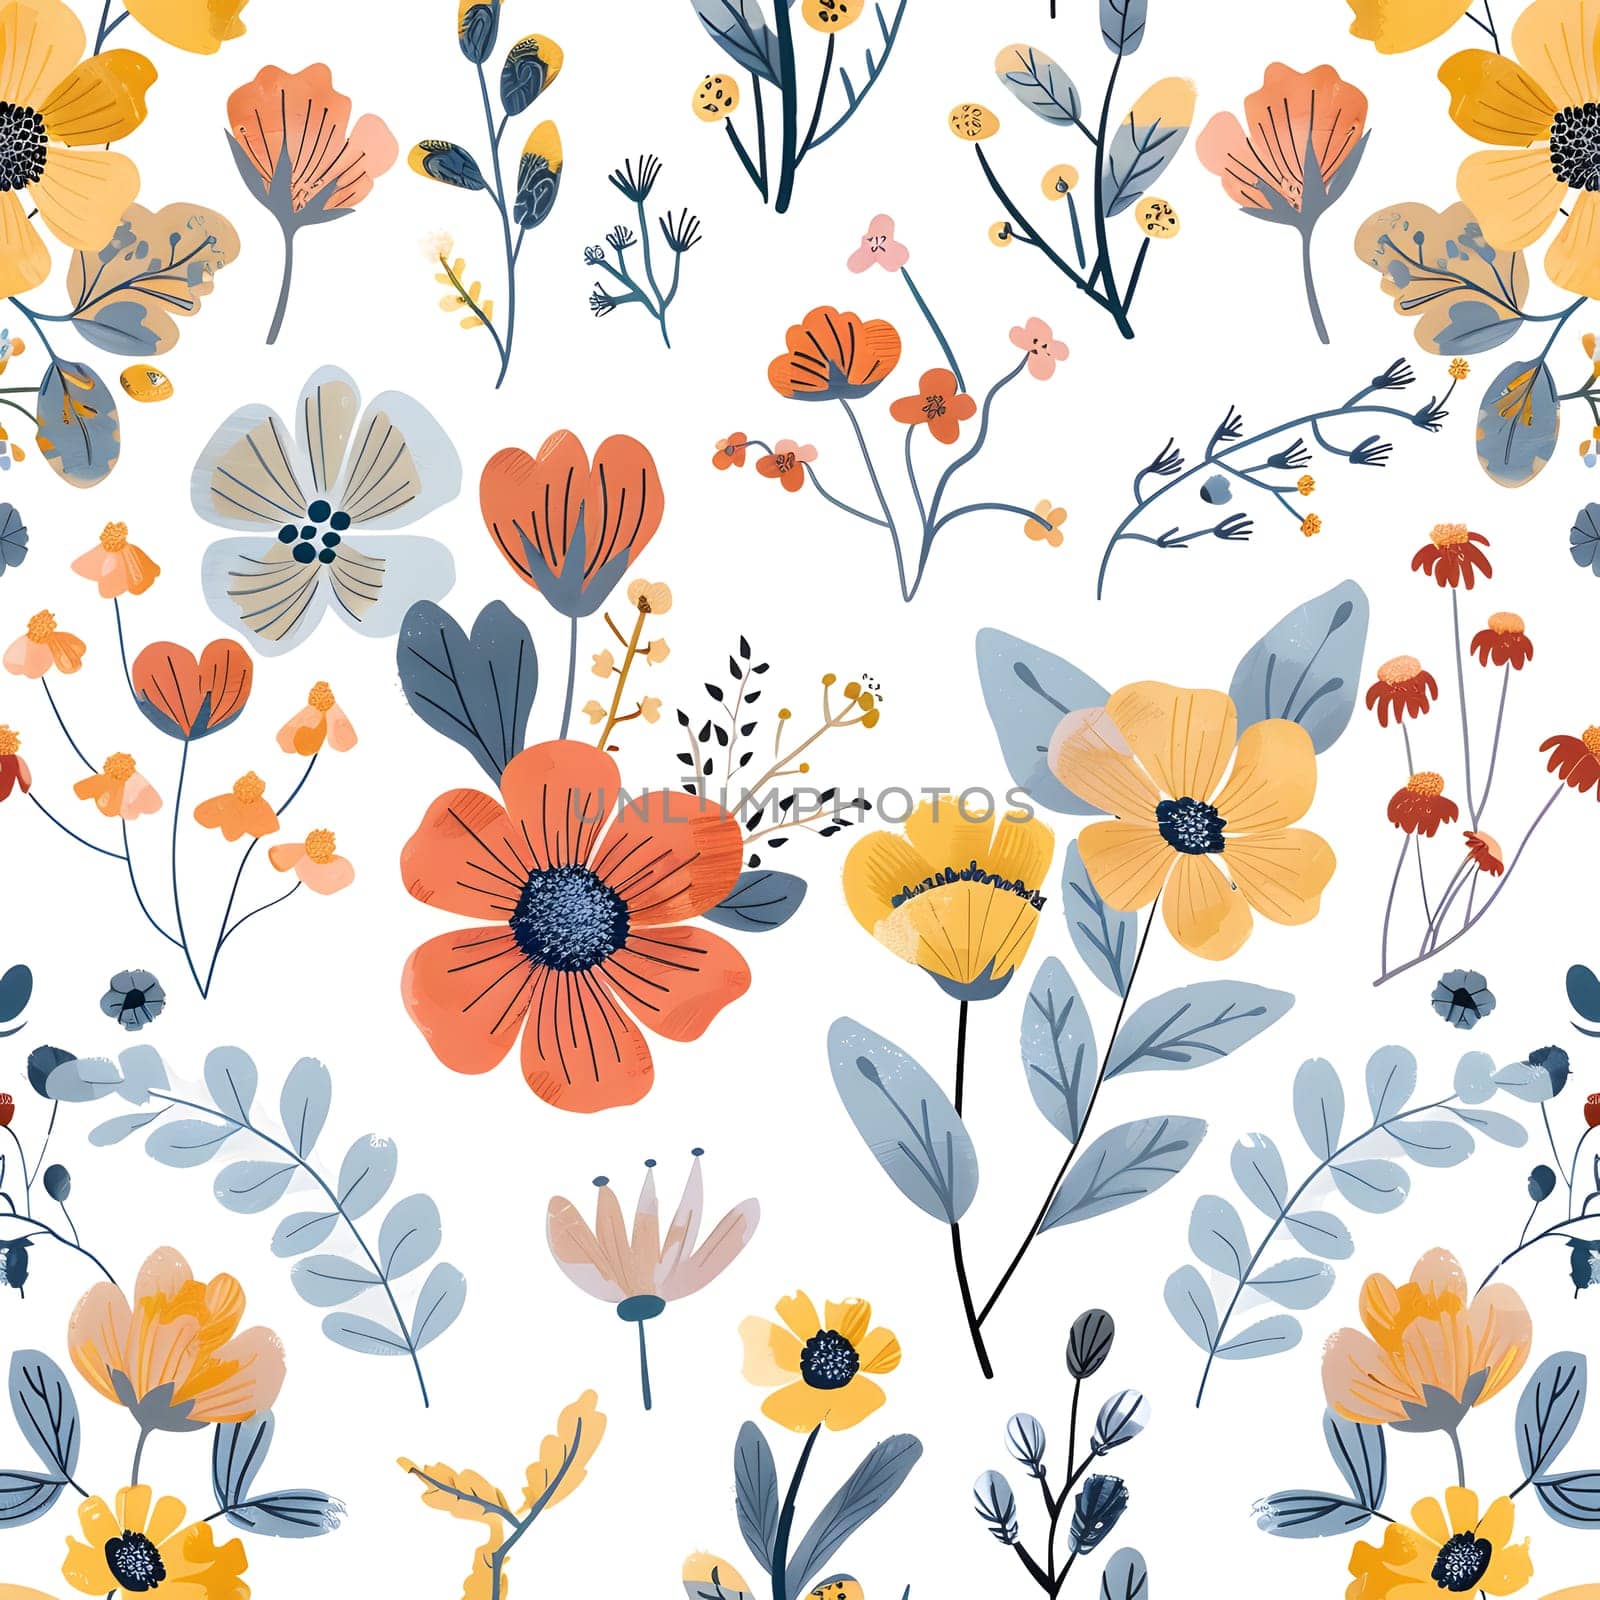 a seamless pattern of flowers and leaves on a white background by Nadtochiy